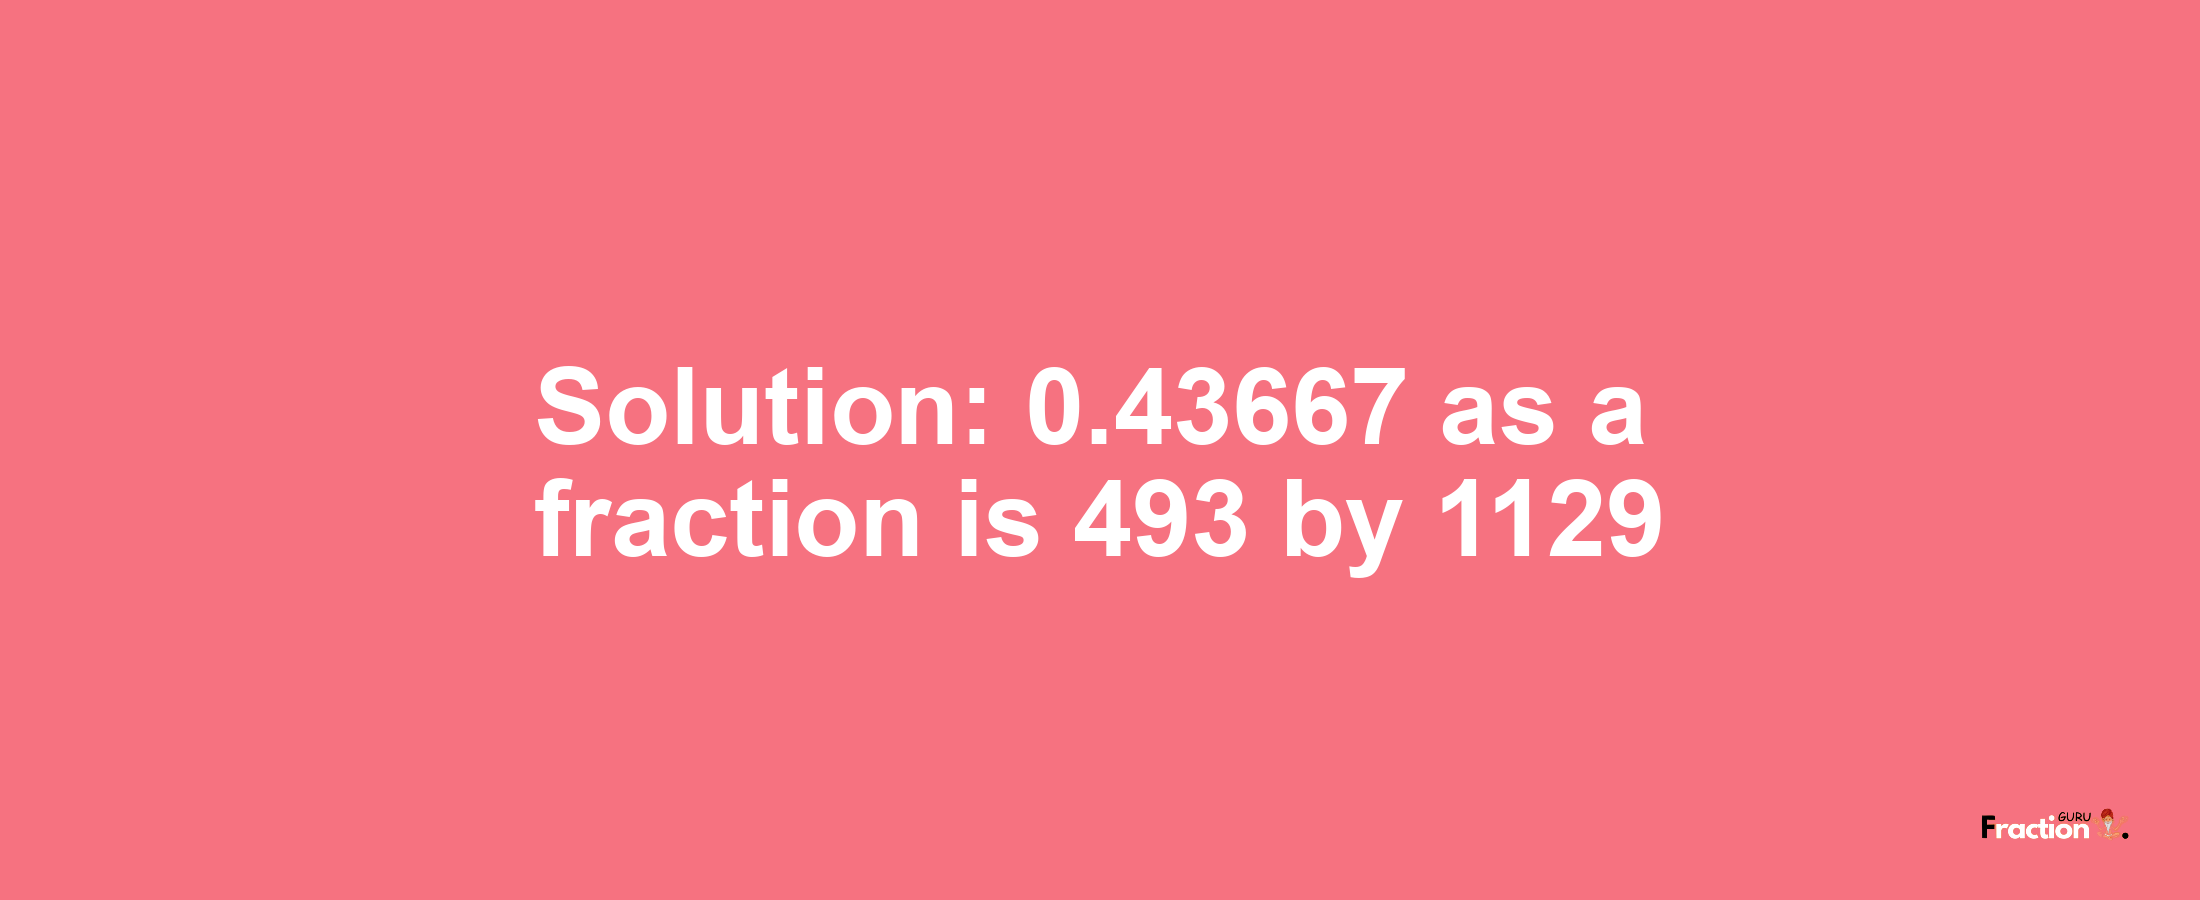 Solution:0.43667 as a fraction is 493/1129